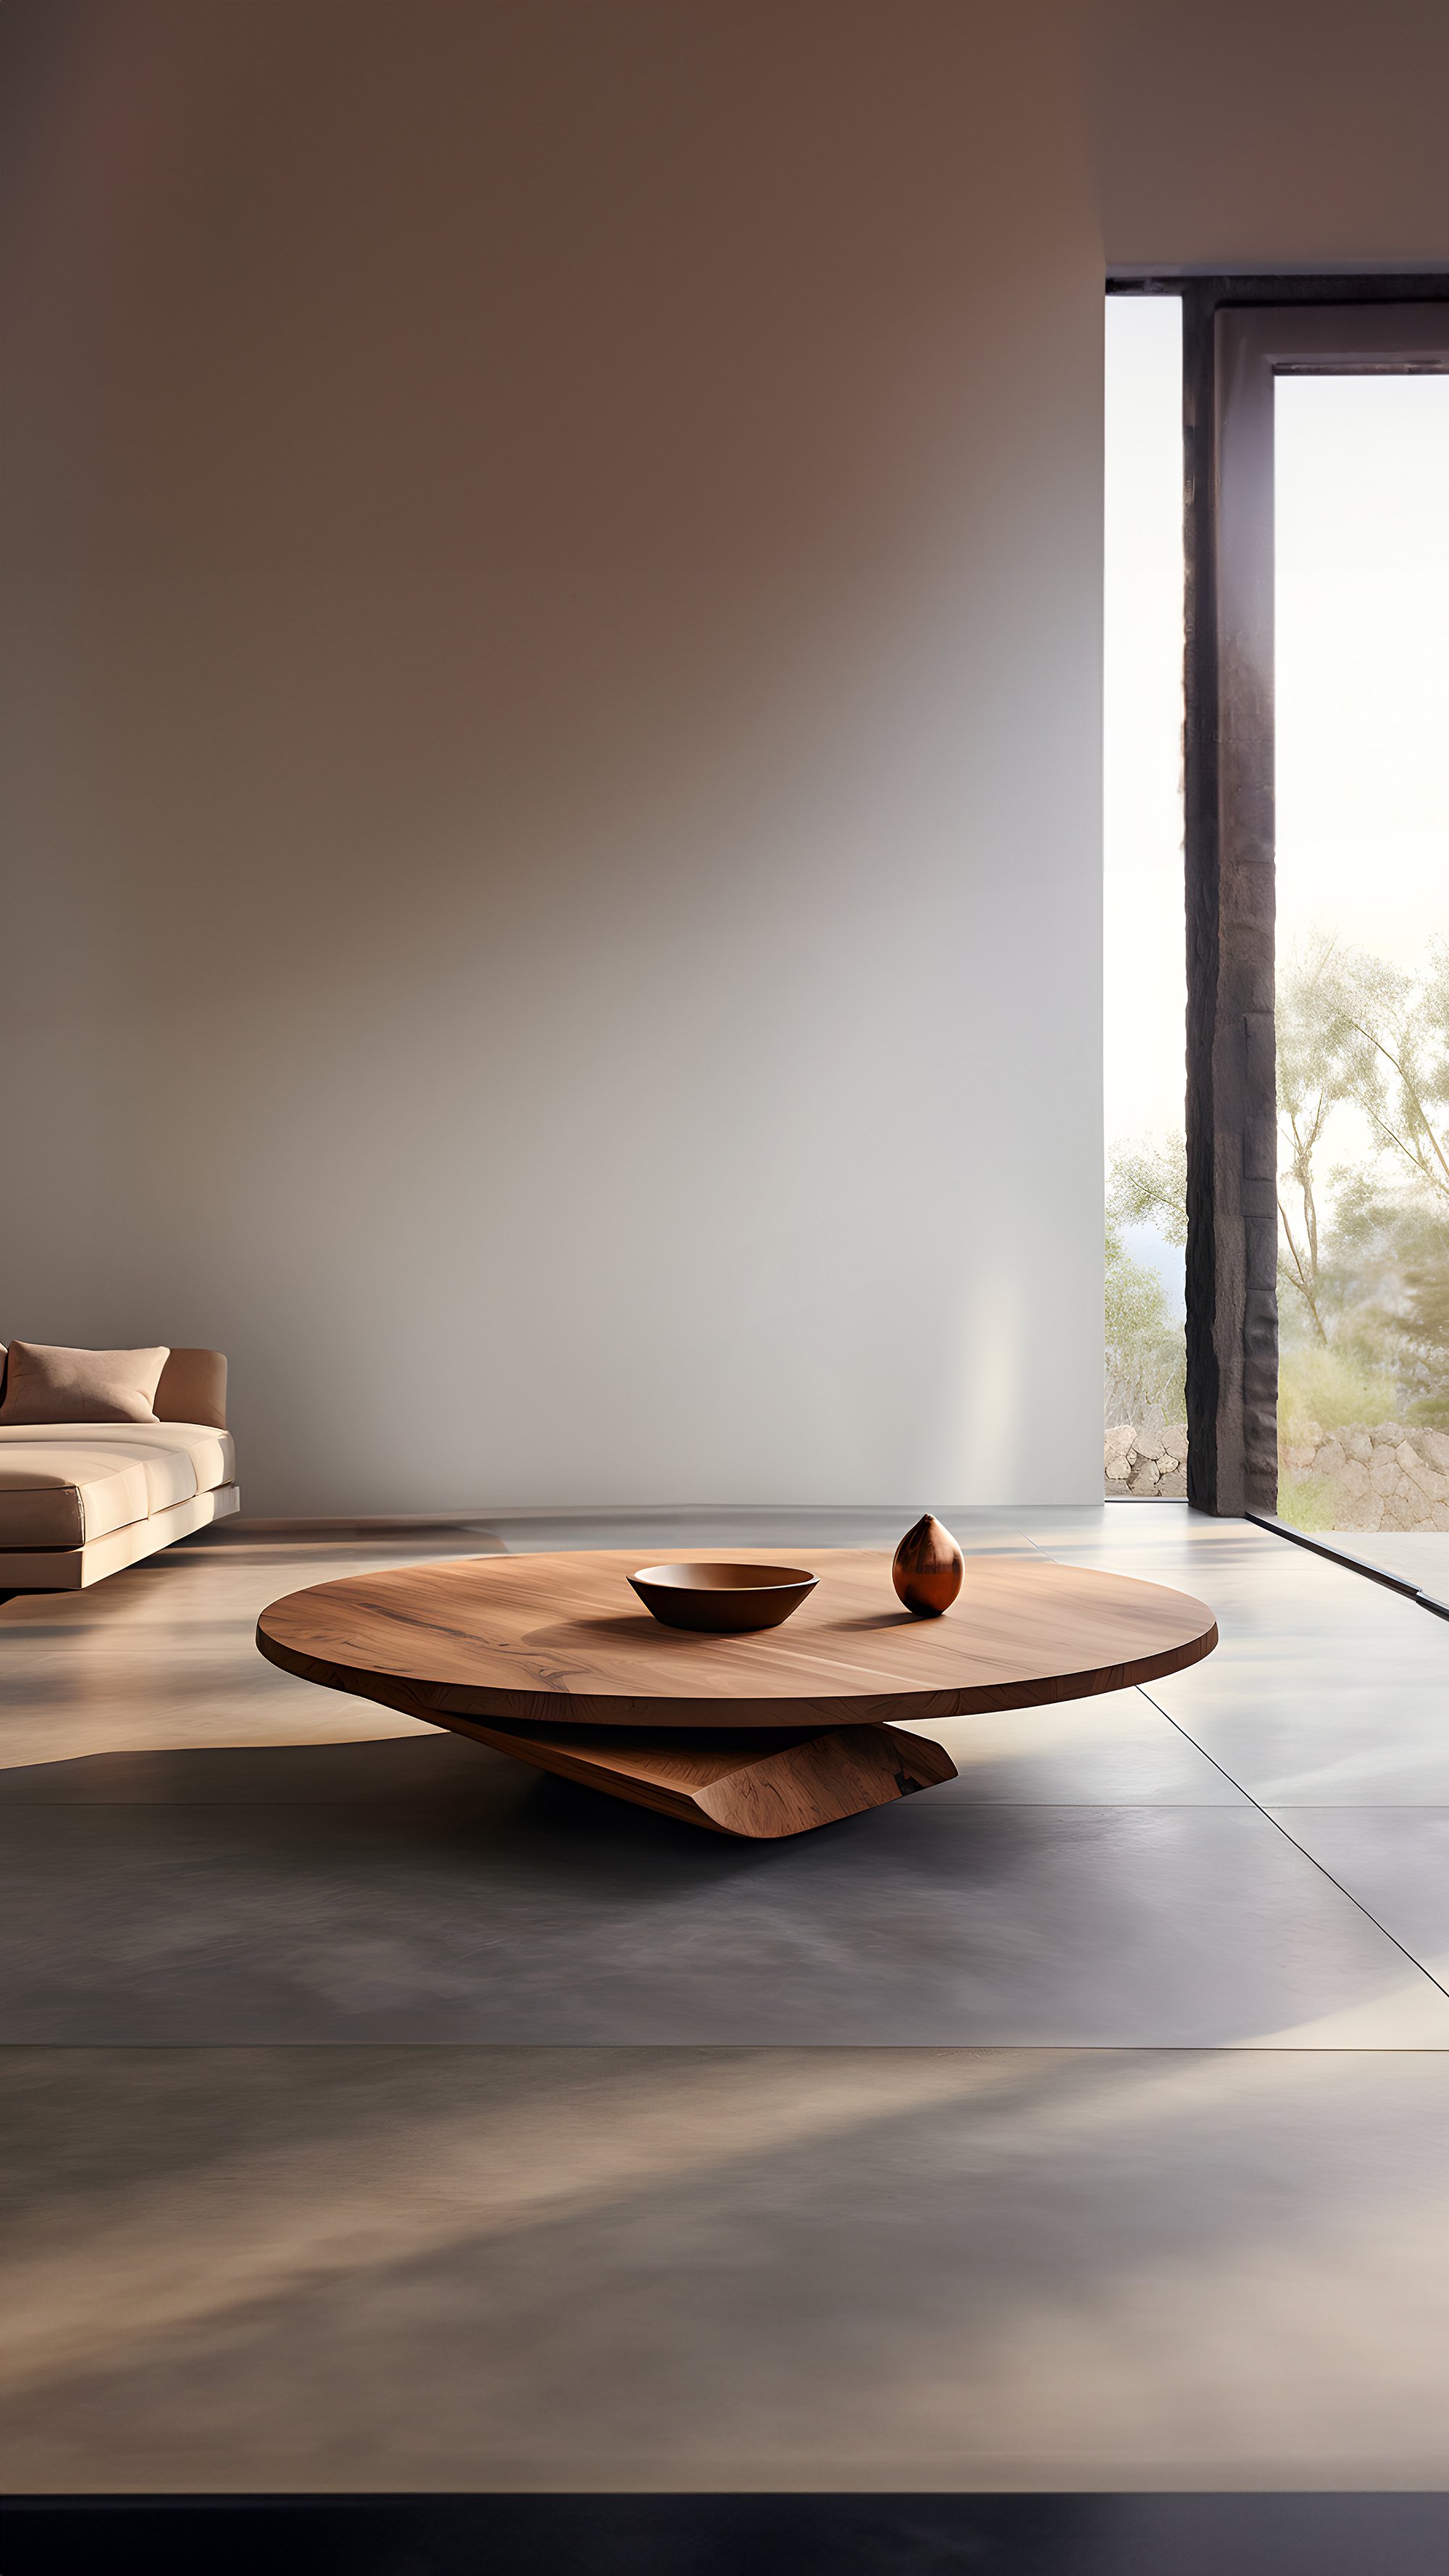 Sculptural Coffee Table Made of Solid Wood, Center Table Solace S51 by Joel Escalona — 7.jpg